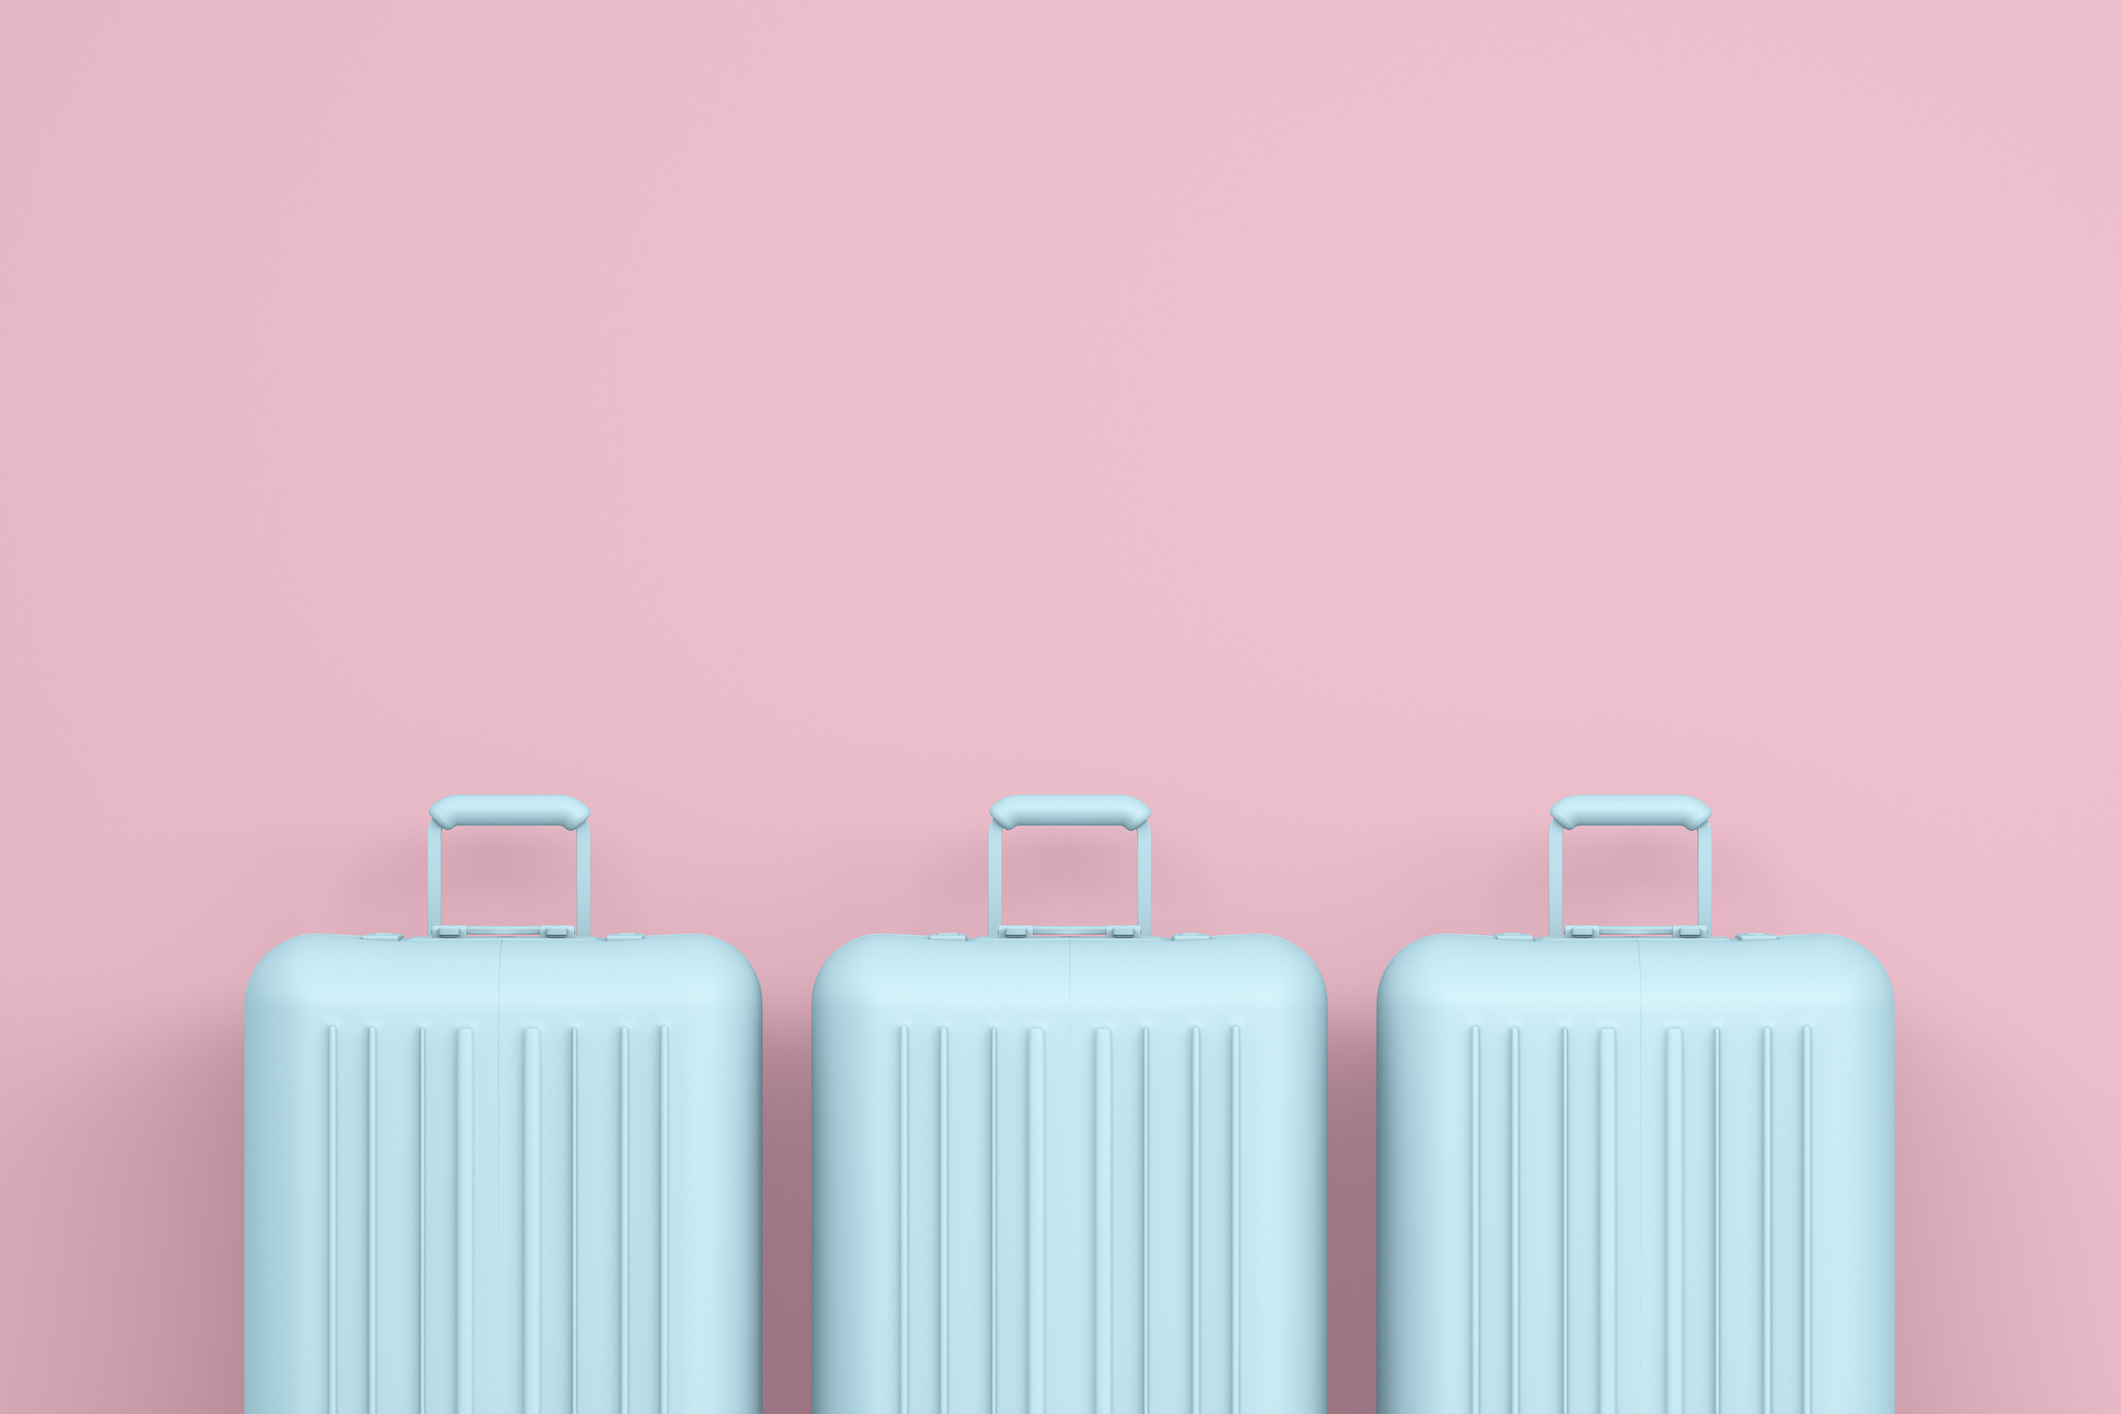 Blue suitcases in a pink room